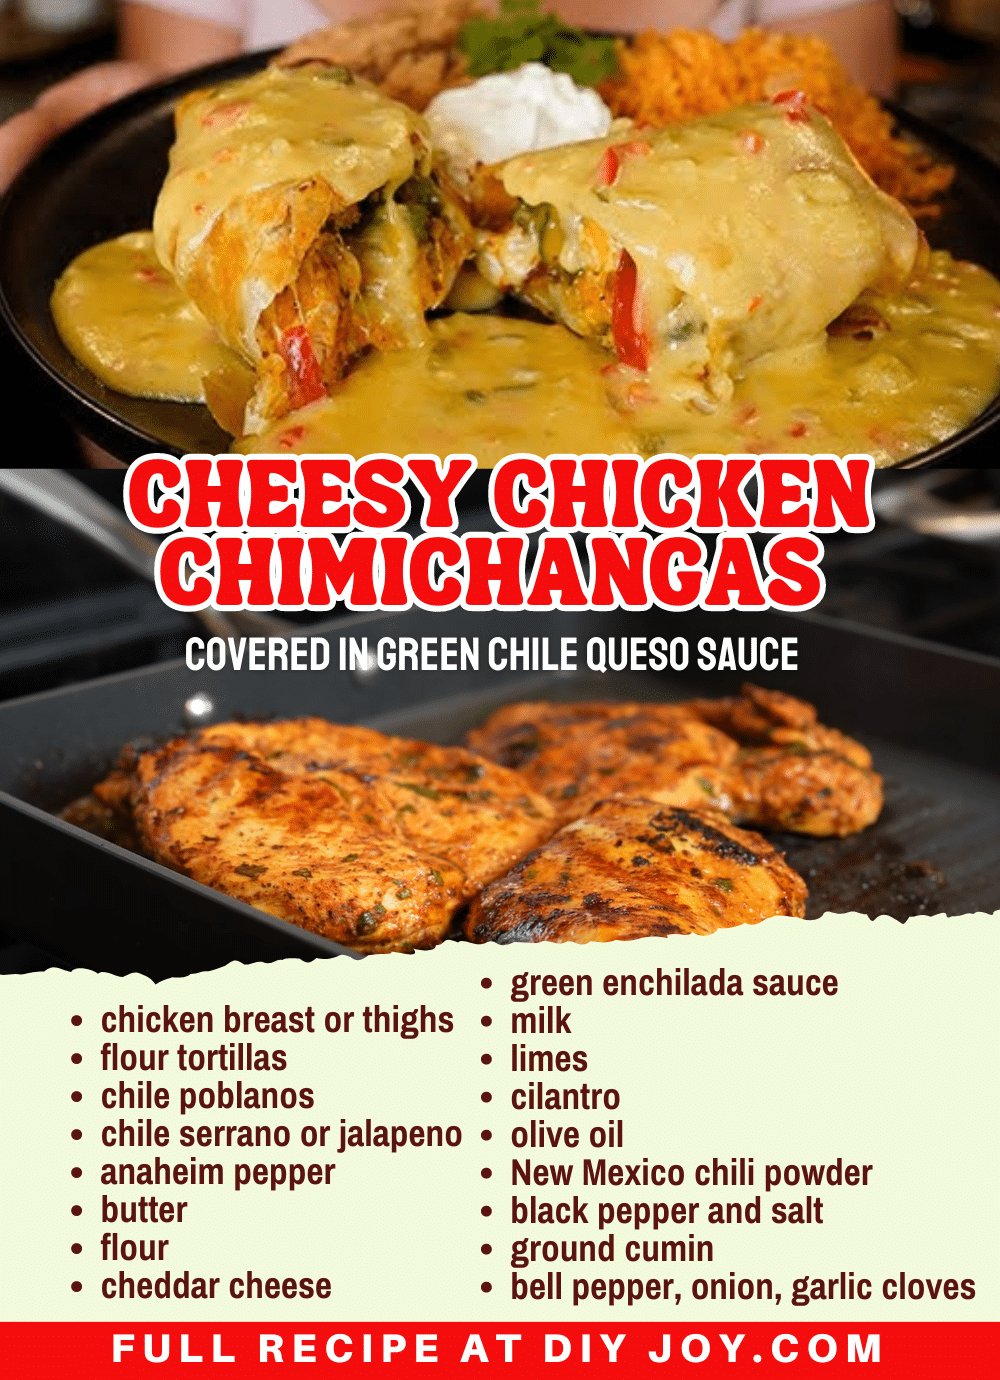 Cheesy Chicken Chimichangas With Green Chile Queso Sauce